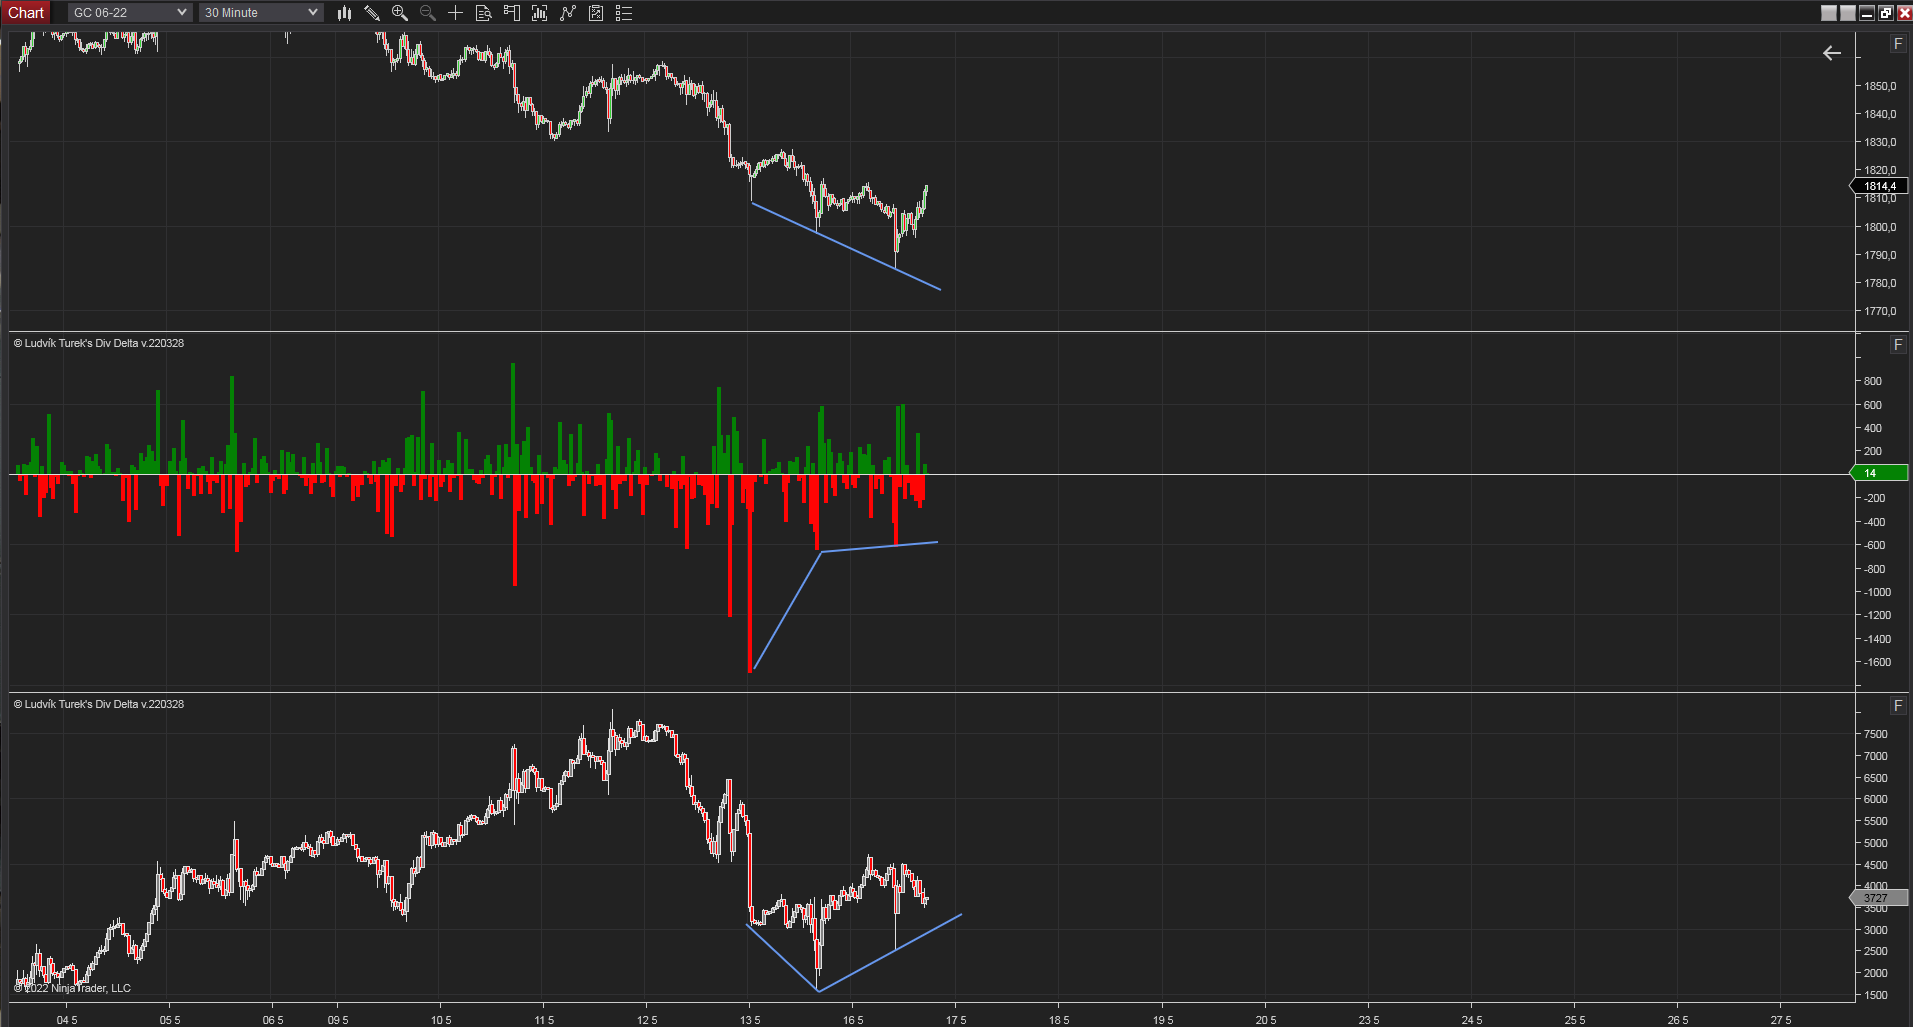 30 minutes chart of GC, Divergence delta indicator. Source: Author's analysis